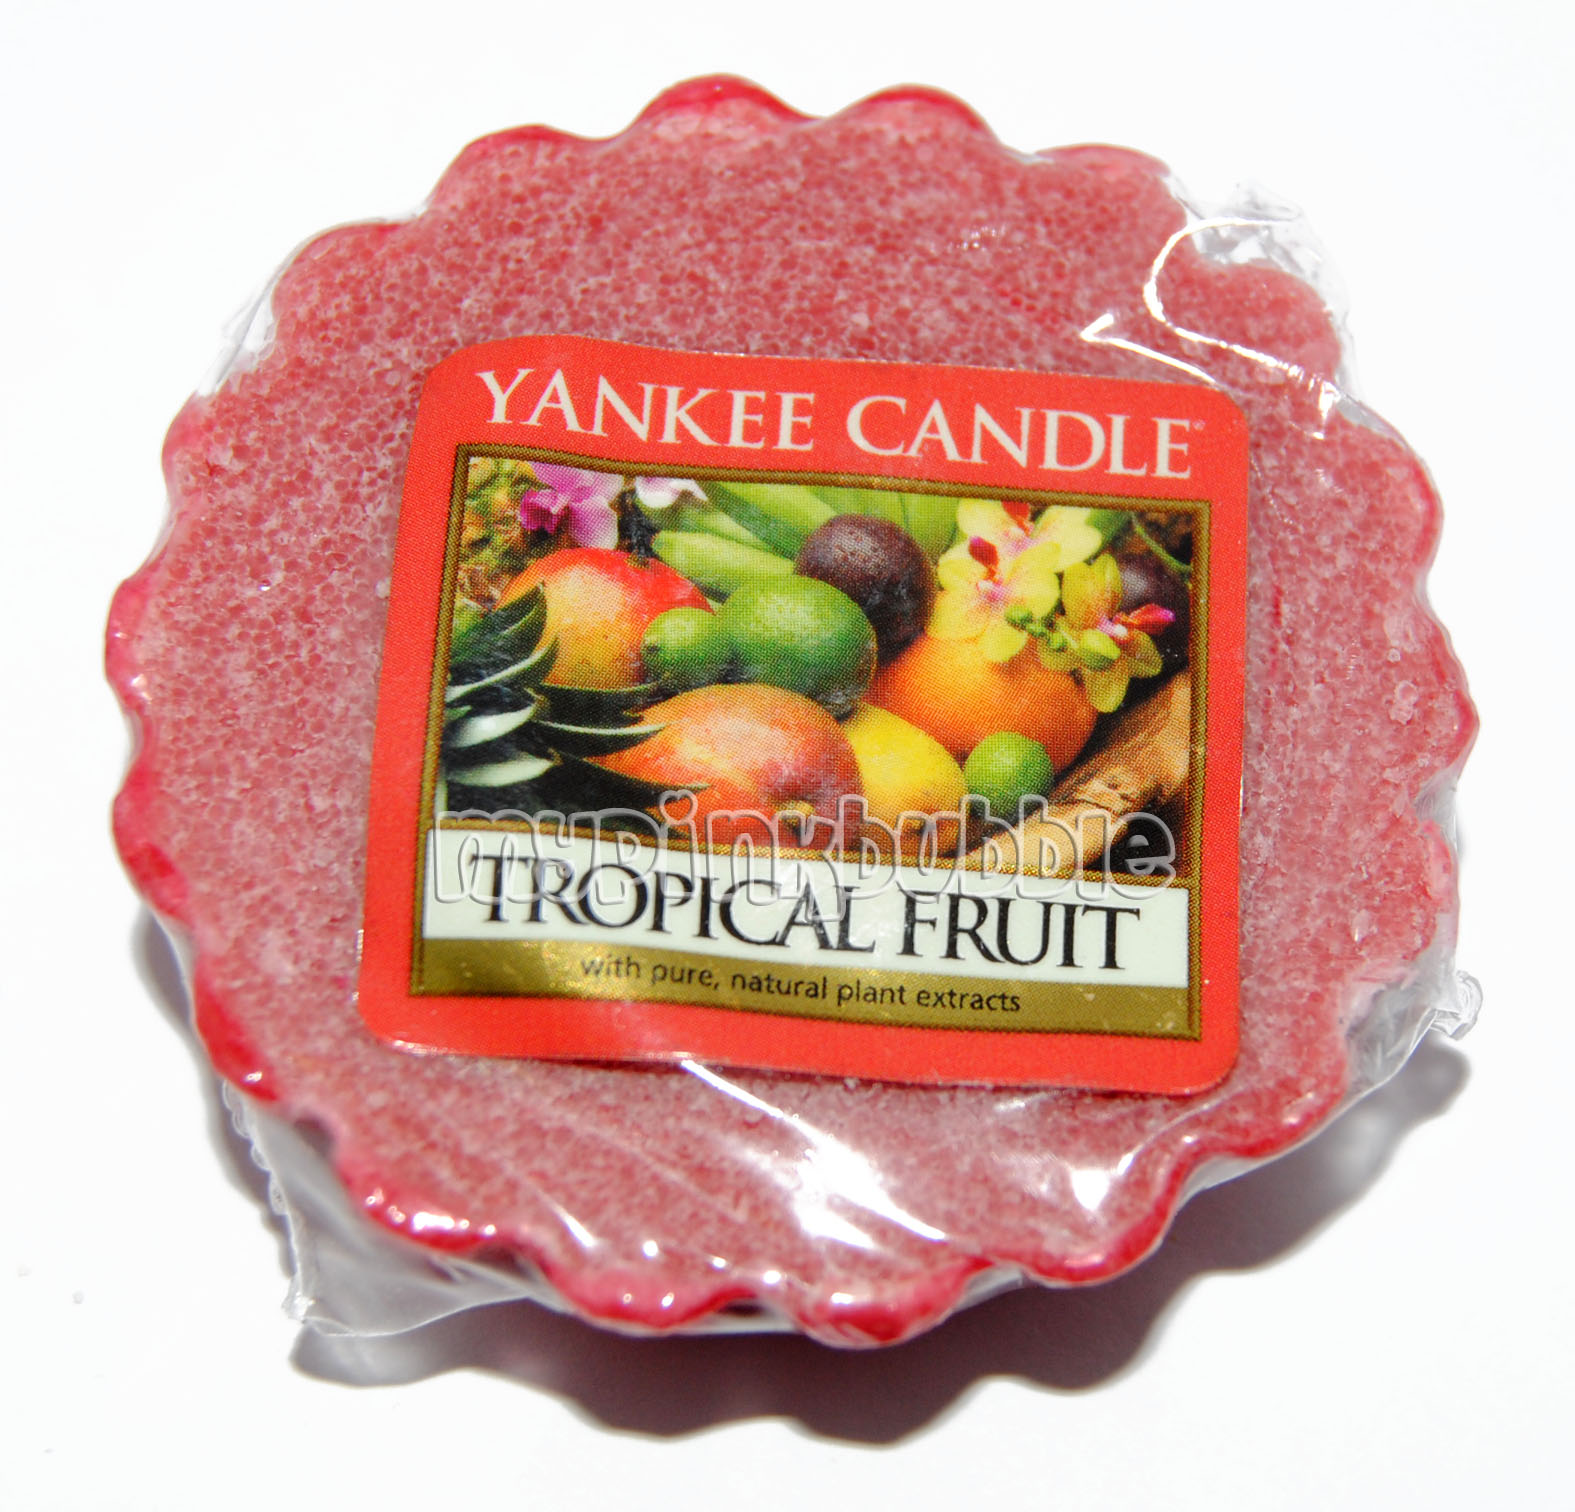 Yankee Candle Tropical Fruit